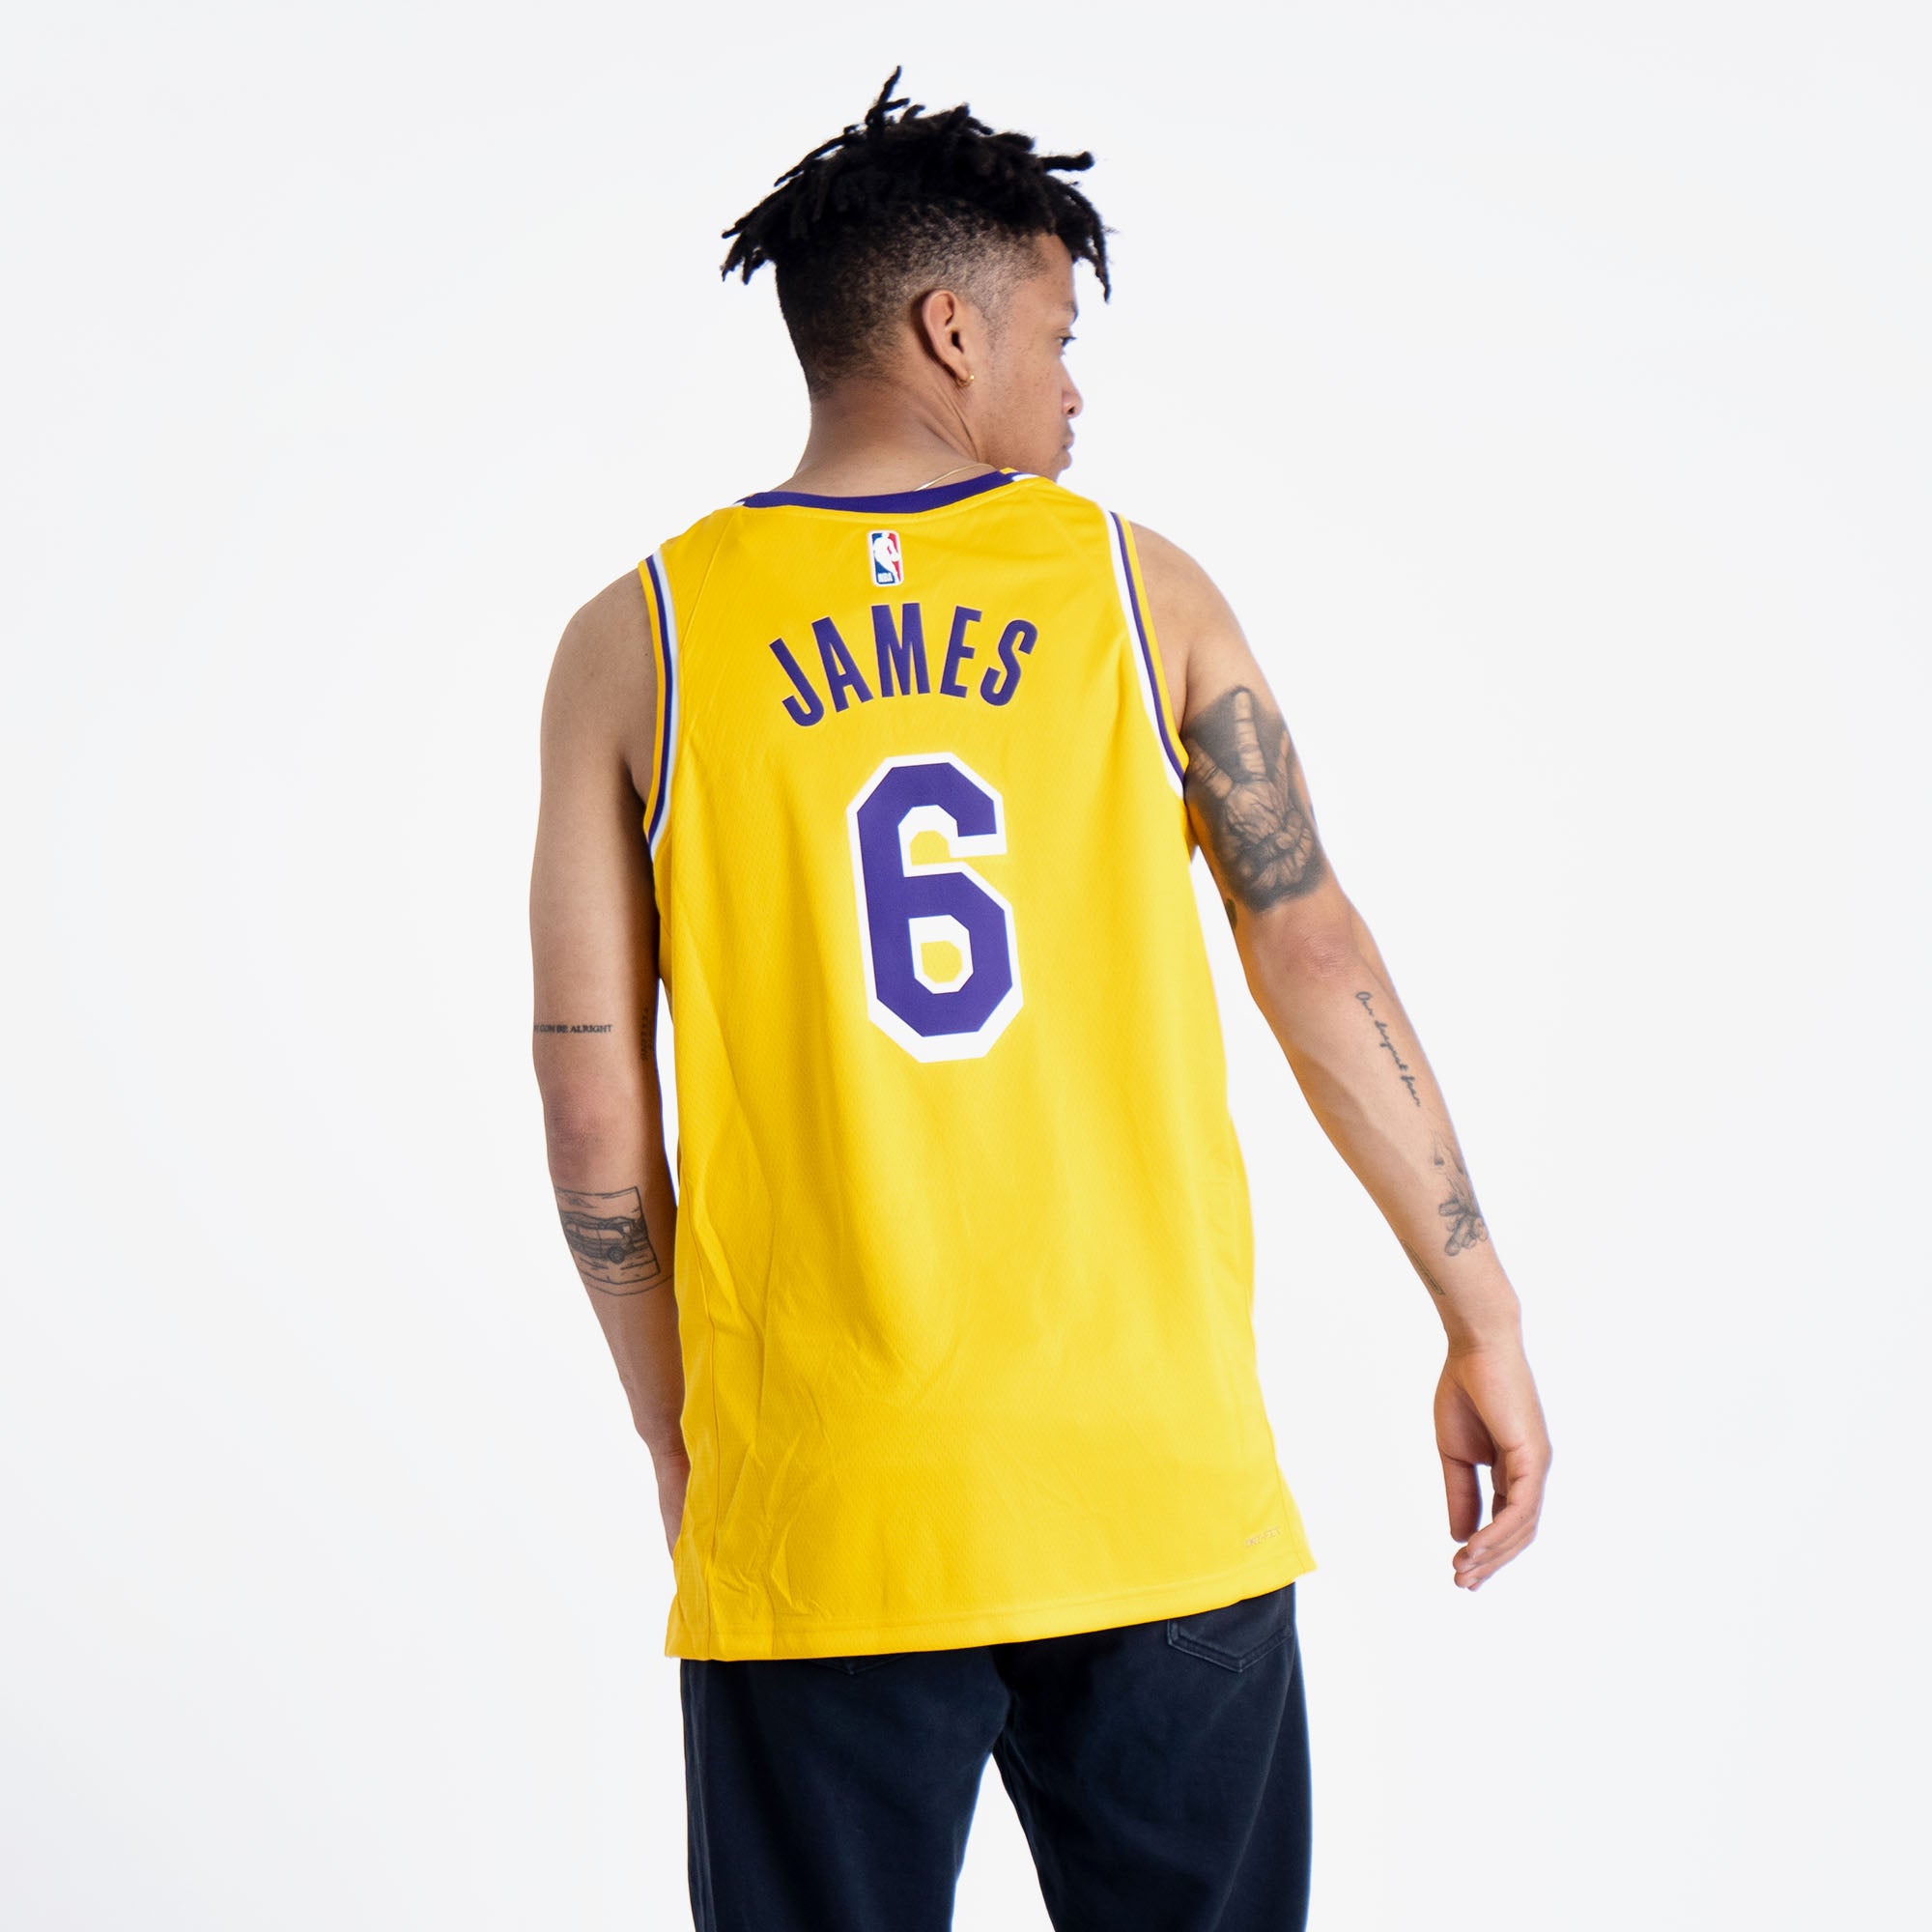 Infant Nike LeBron James Gold Los Angeles Lakers Swingman Player Jersey - Icon Edition